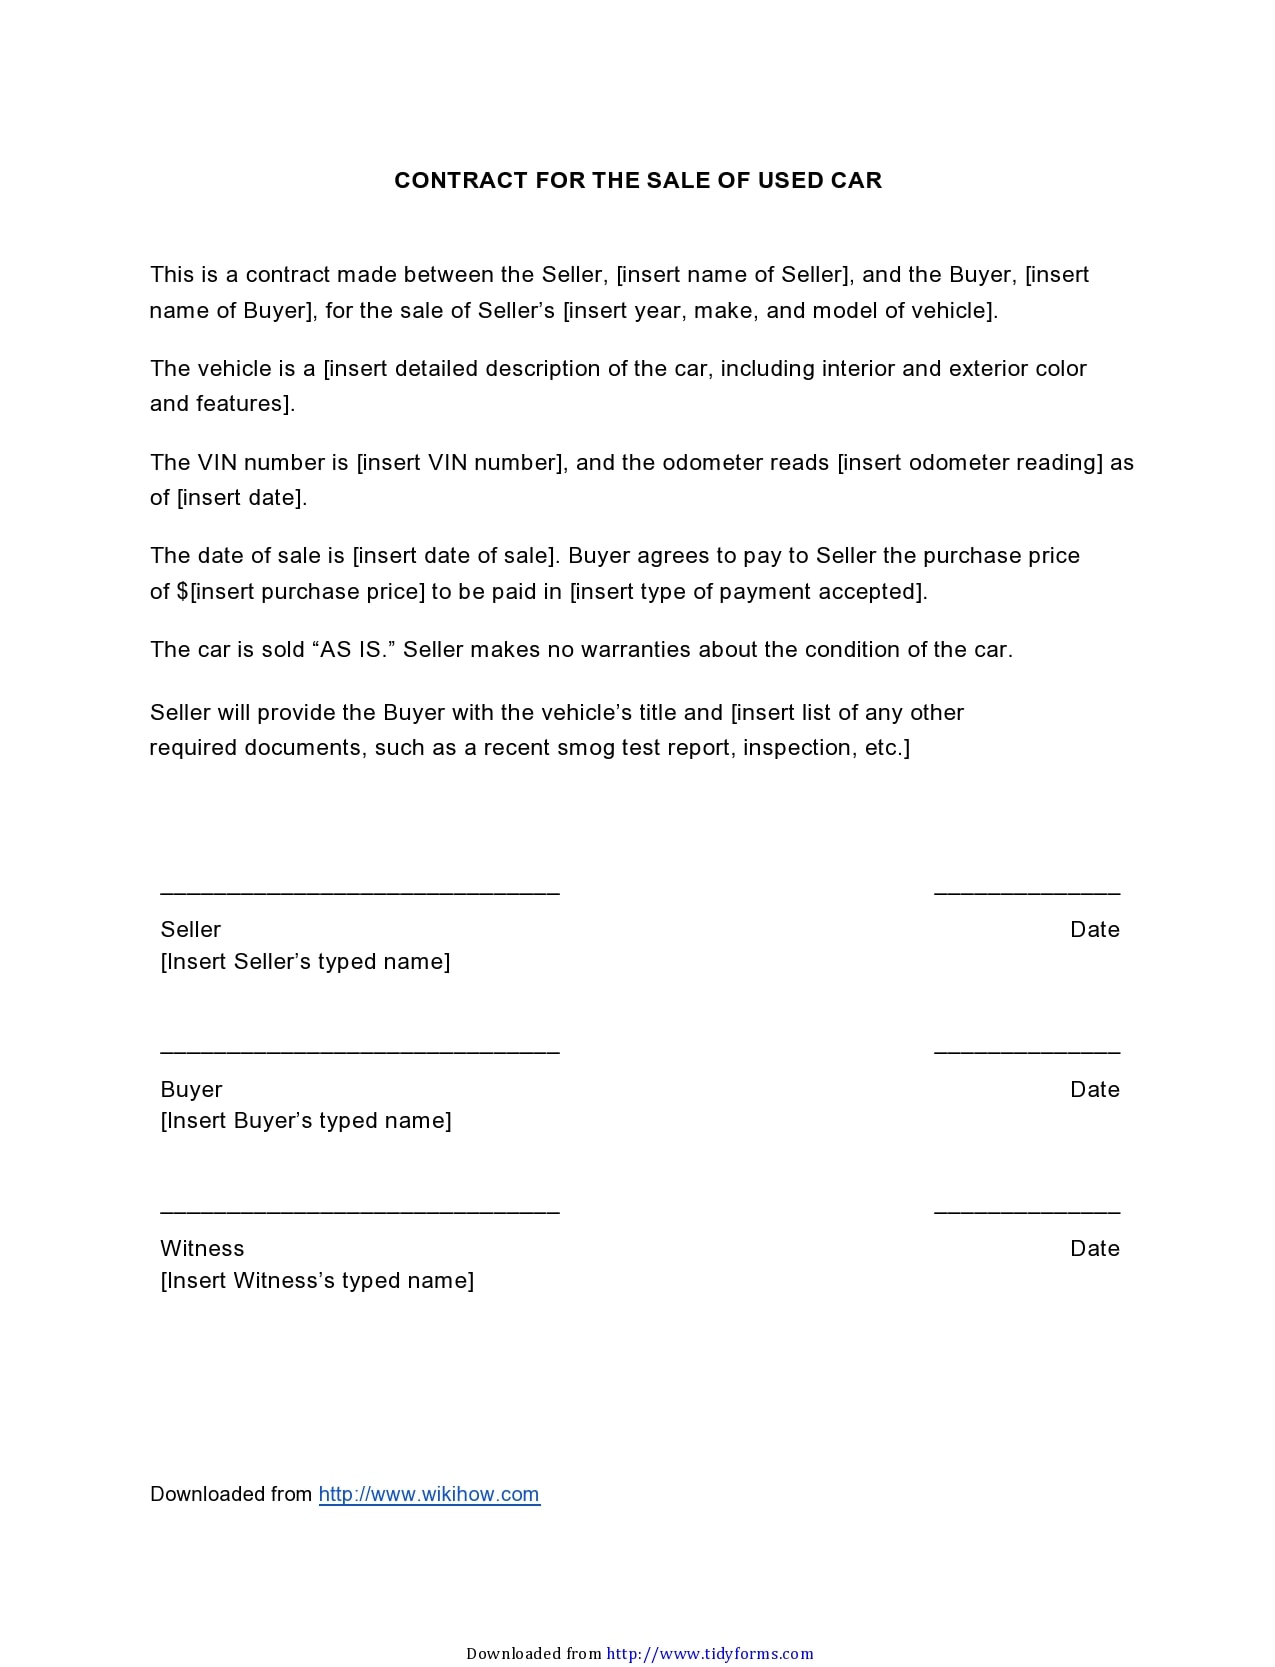 21 Simple Car Sale Contract Templates [21% Free] With car purchase agreement template